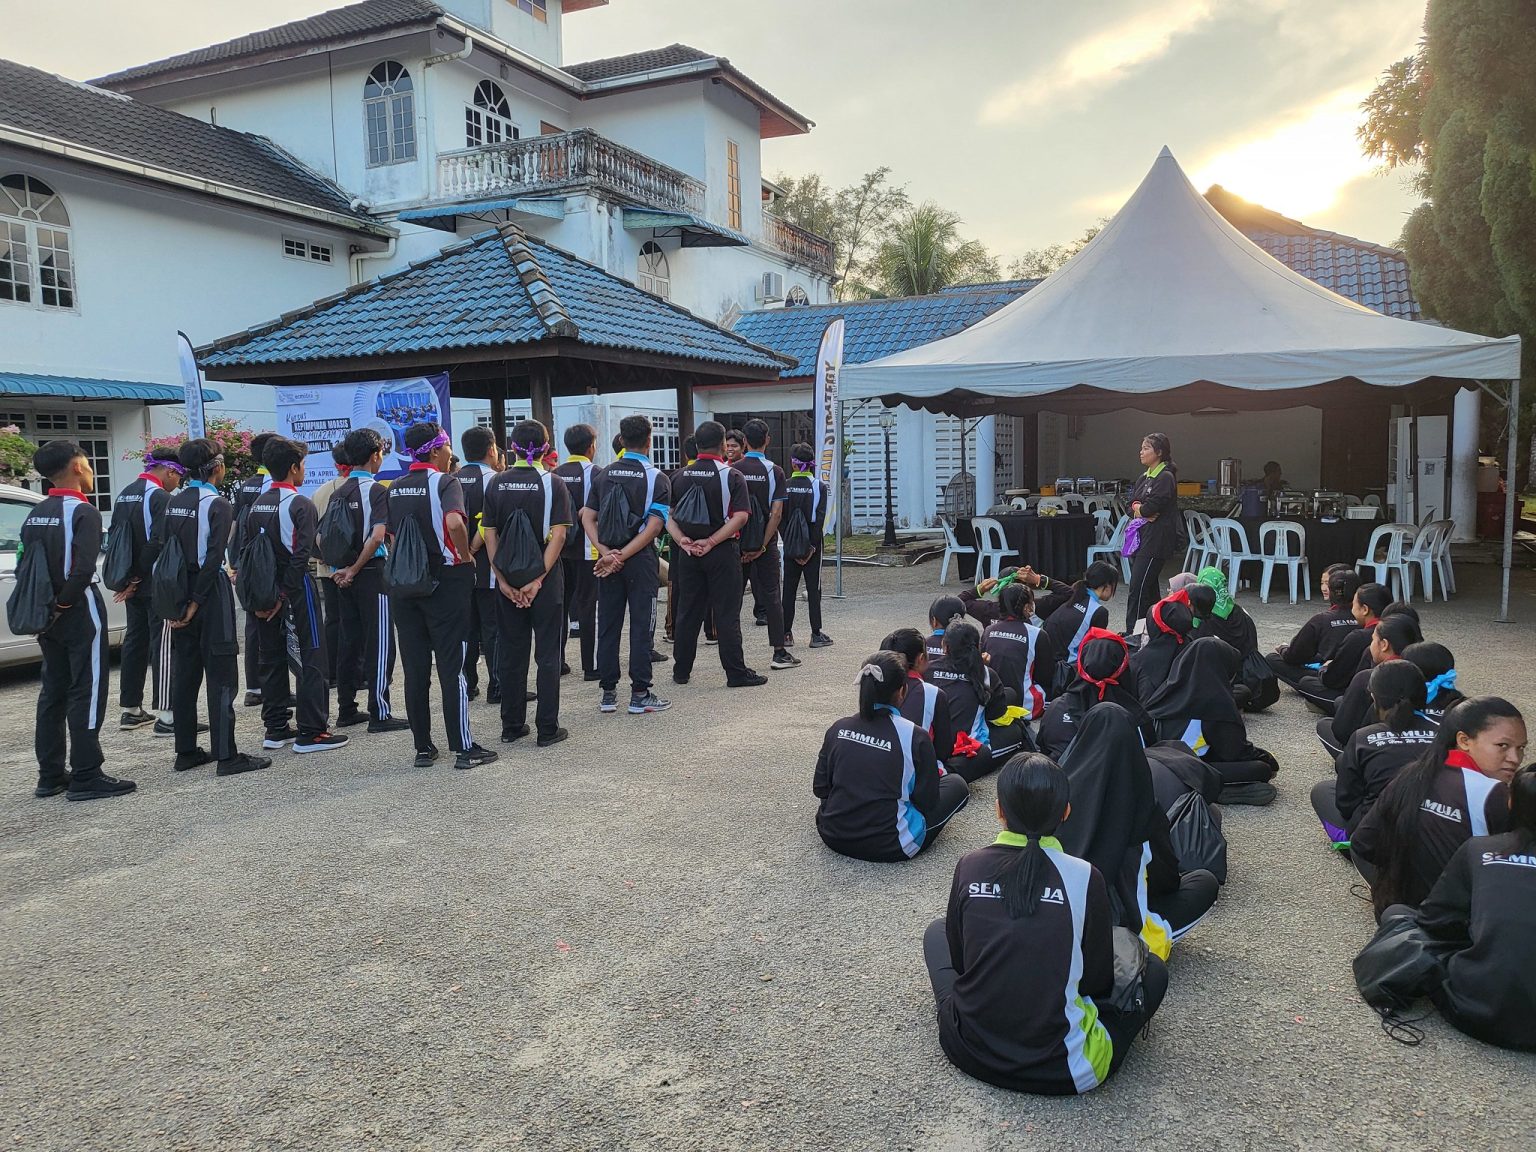 A group of people in matching uniforms are gathered outdoors near a building, fostering an empowering atmosphere. Some are standing in lines while others are seated. There is a tent and several empty chairs nearby, embodying the unity often seen at events focused on Indigenous Youth in Malaysia.